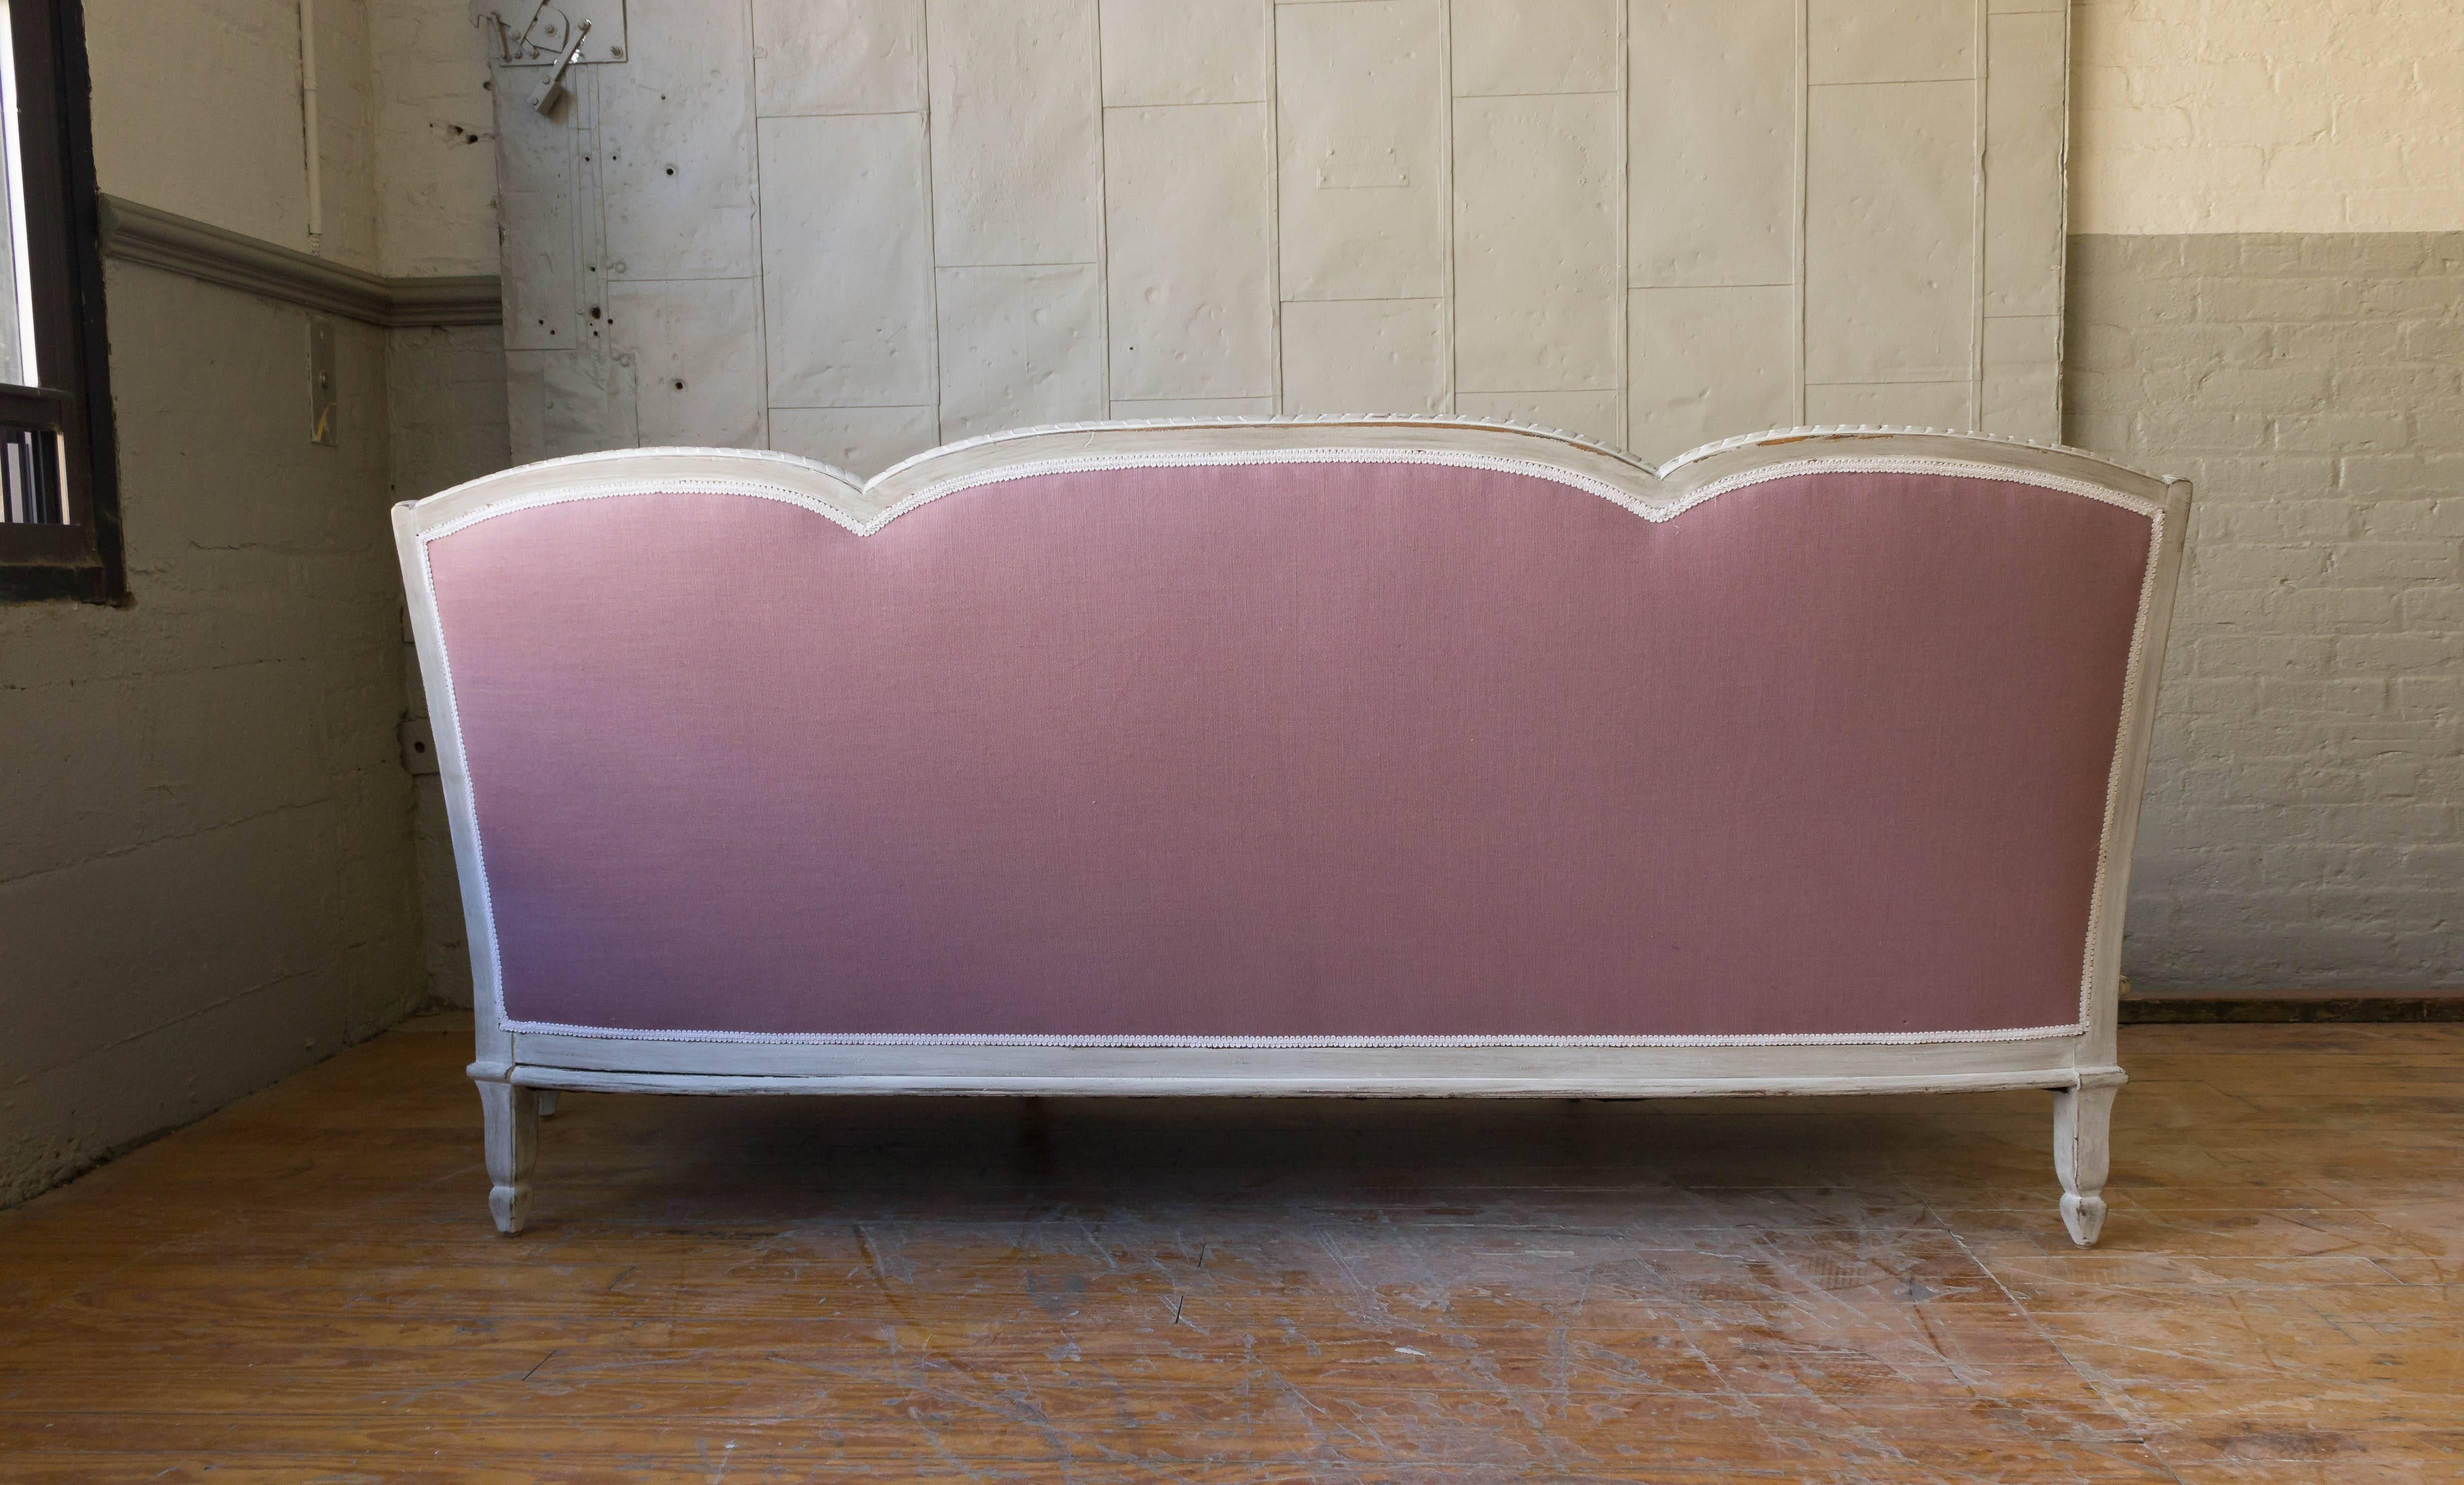 20th Century Art Deco Style Settee Upholstered in Lavender Linen 1